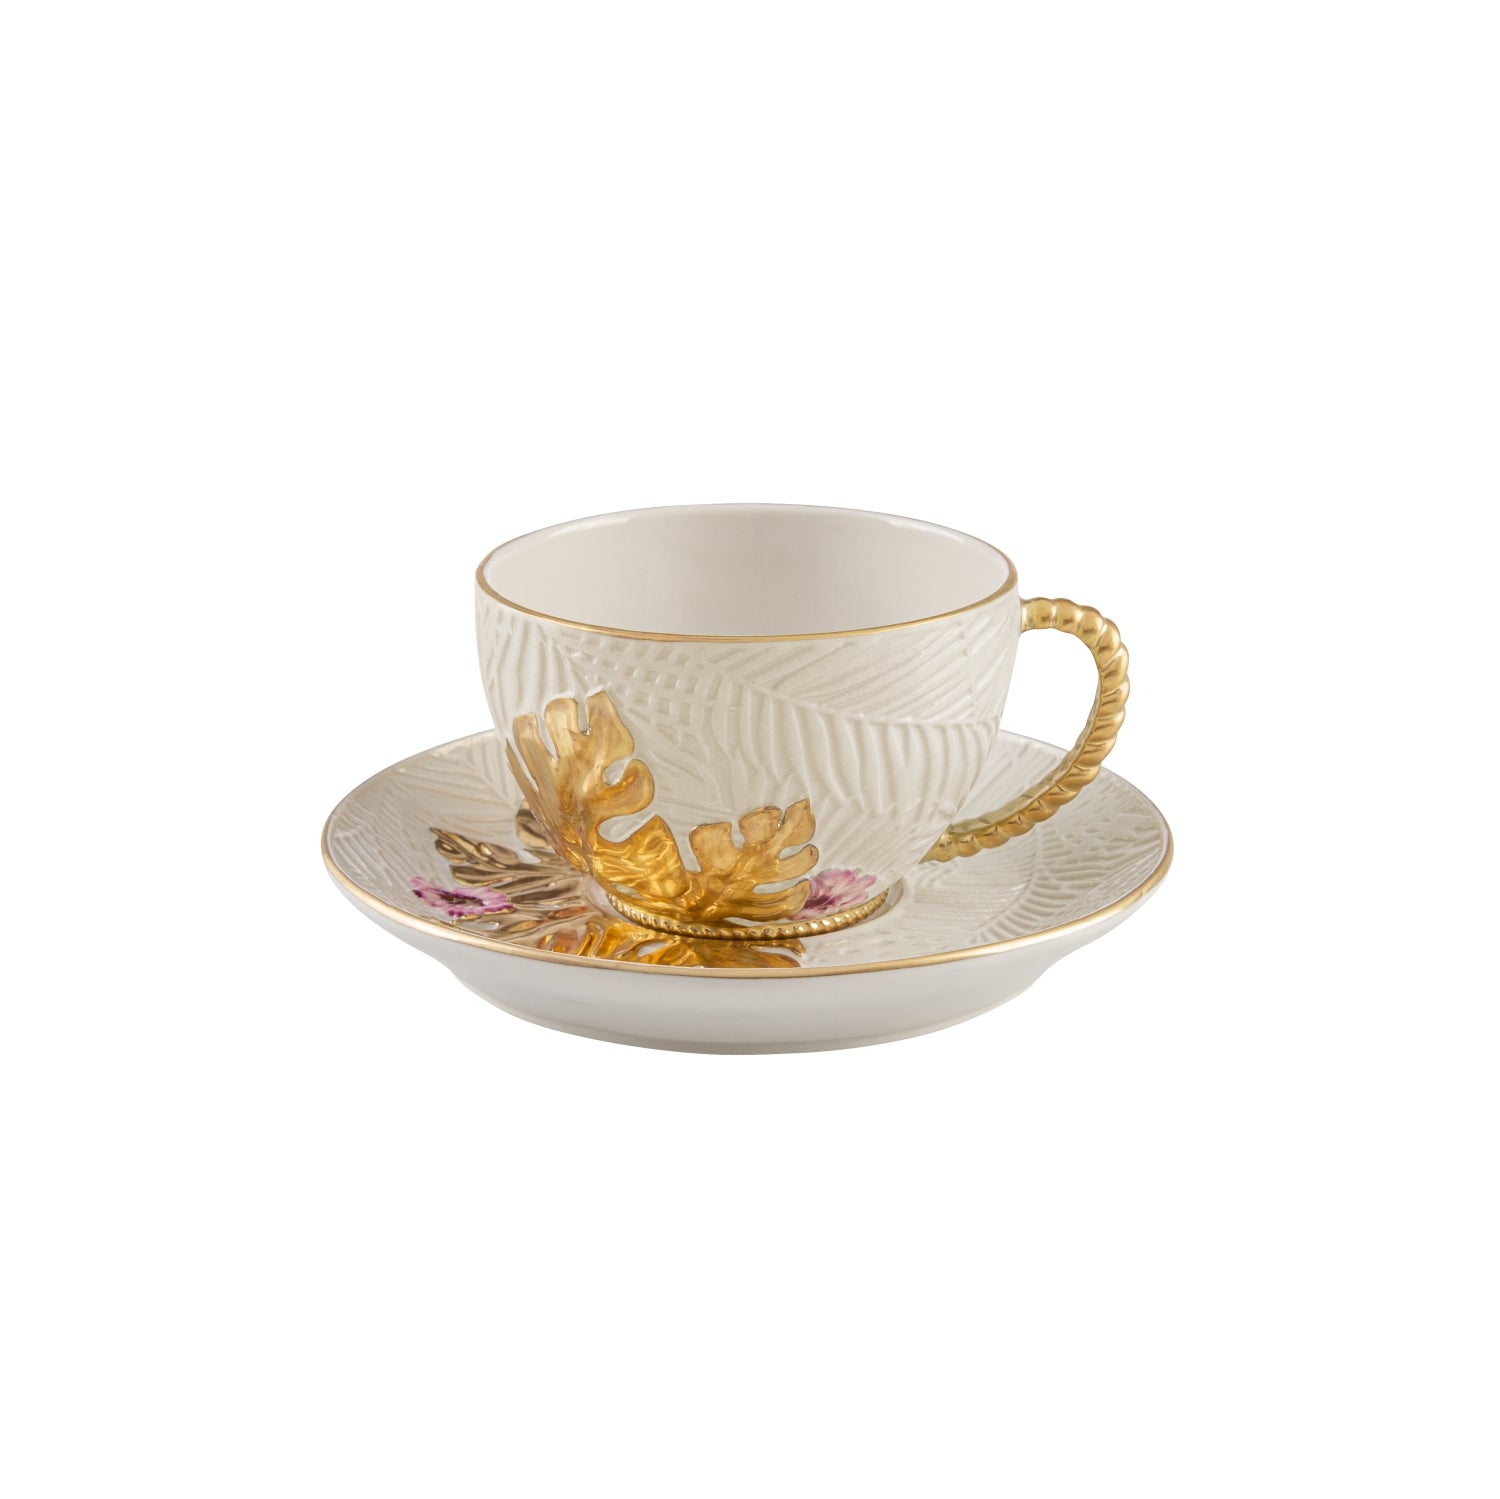 Acapulco Coffee Cup & Saucer - White